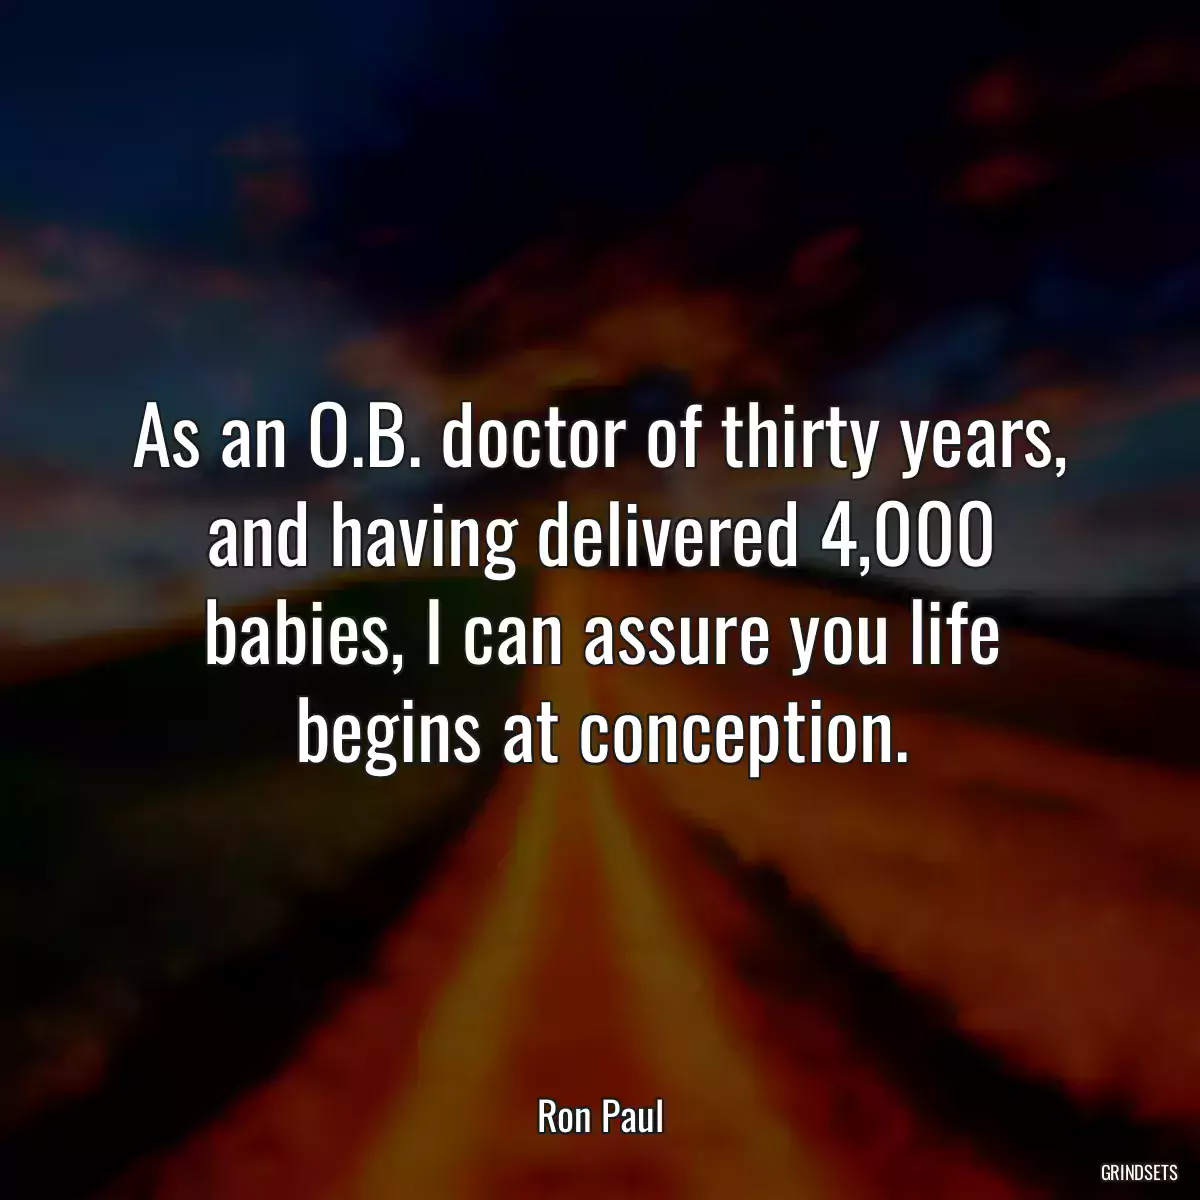 As an O.B. doctor of thirty years, and having delivered 4,000 babies, I can assure you life begins at conception.